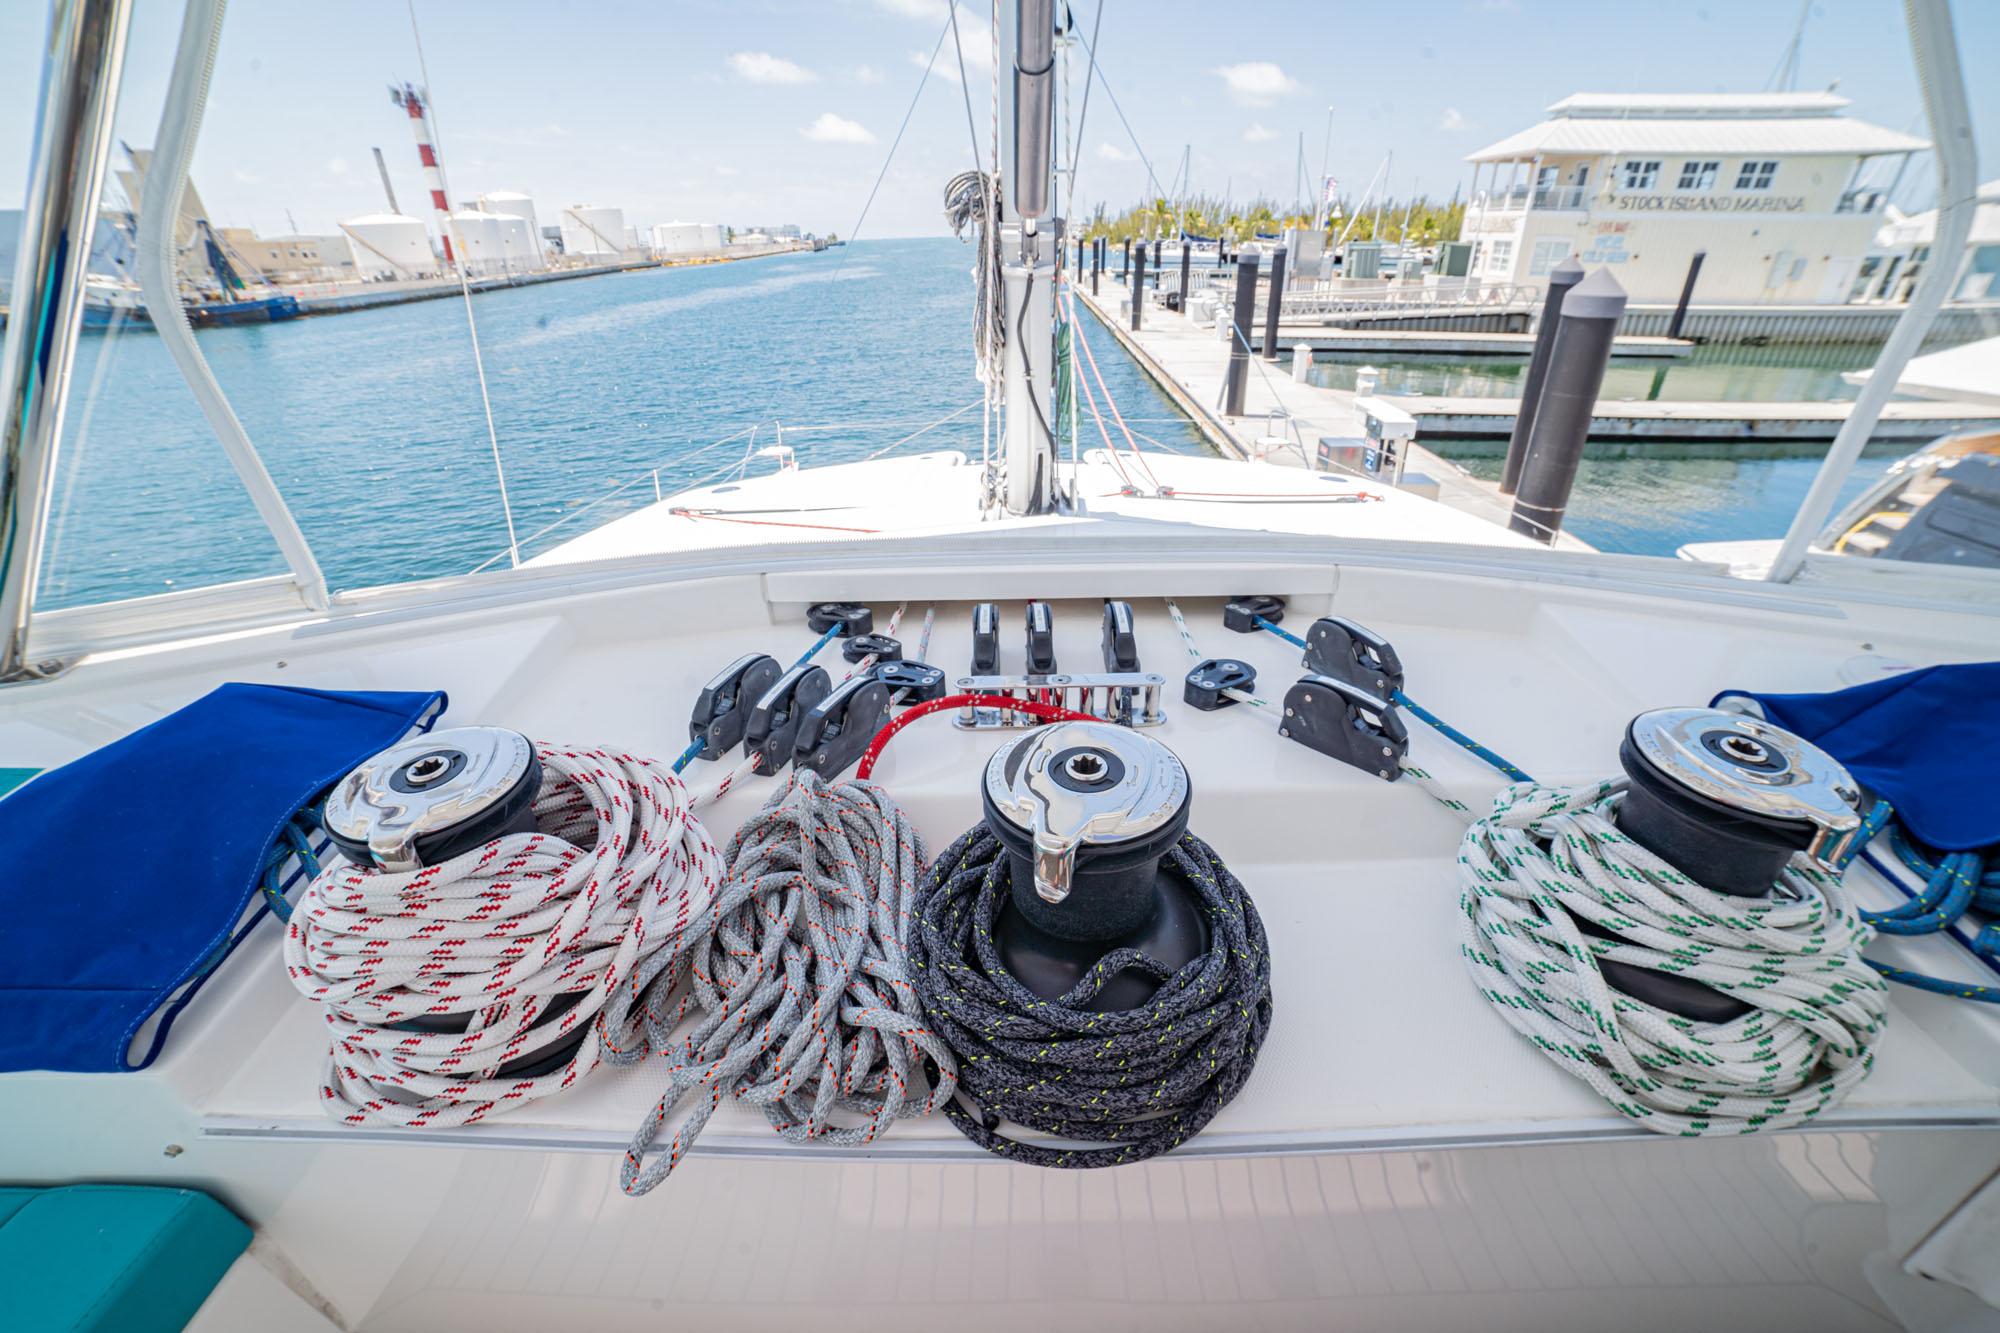 Winches and Rigging